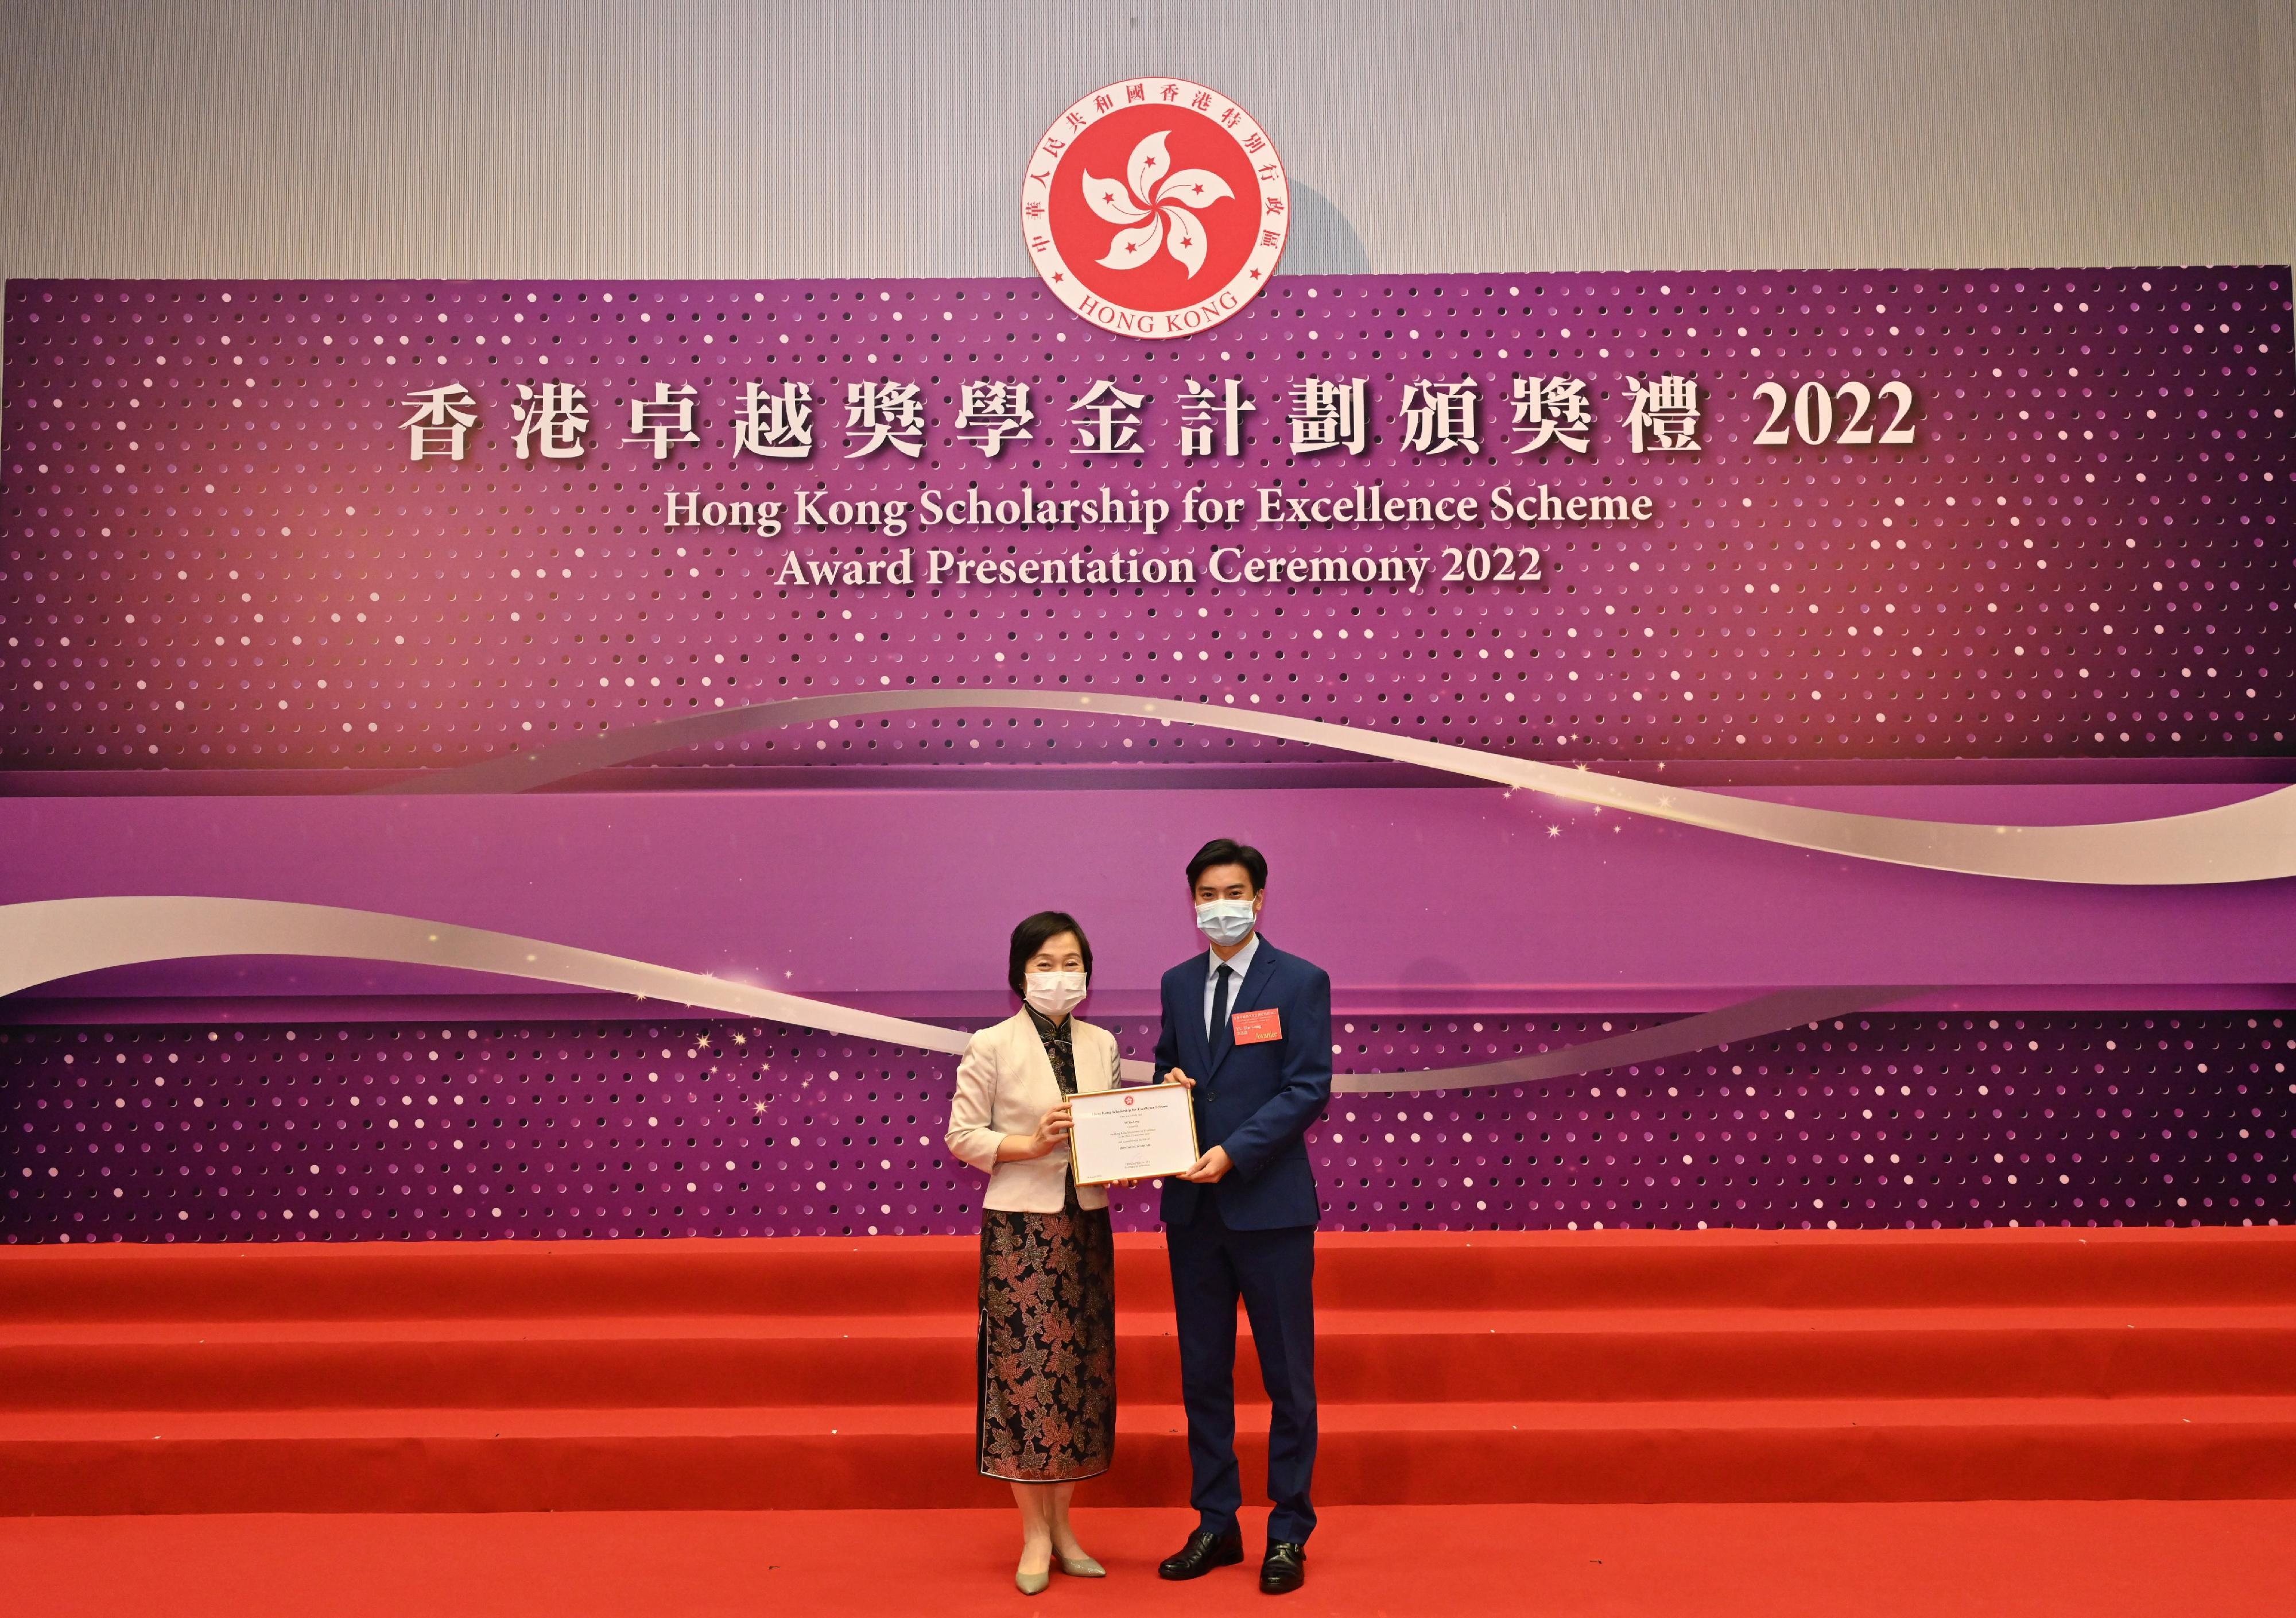 The Secretary for Education, Dr Choi Yuk-lin (left), presents a certificate to an awardee at the Award Presentation Ceremony 2022 of the Hong Kong Scholarship for Excellence Scheme today (August 24).